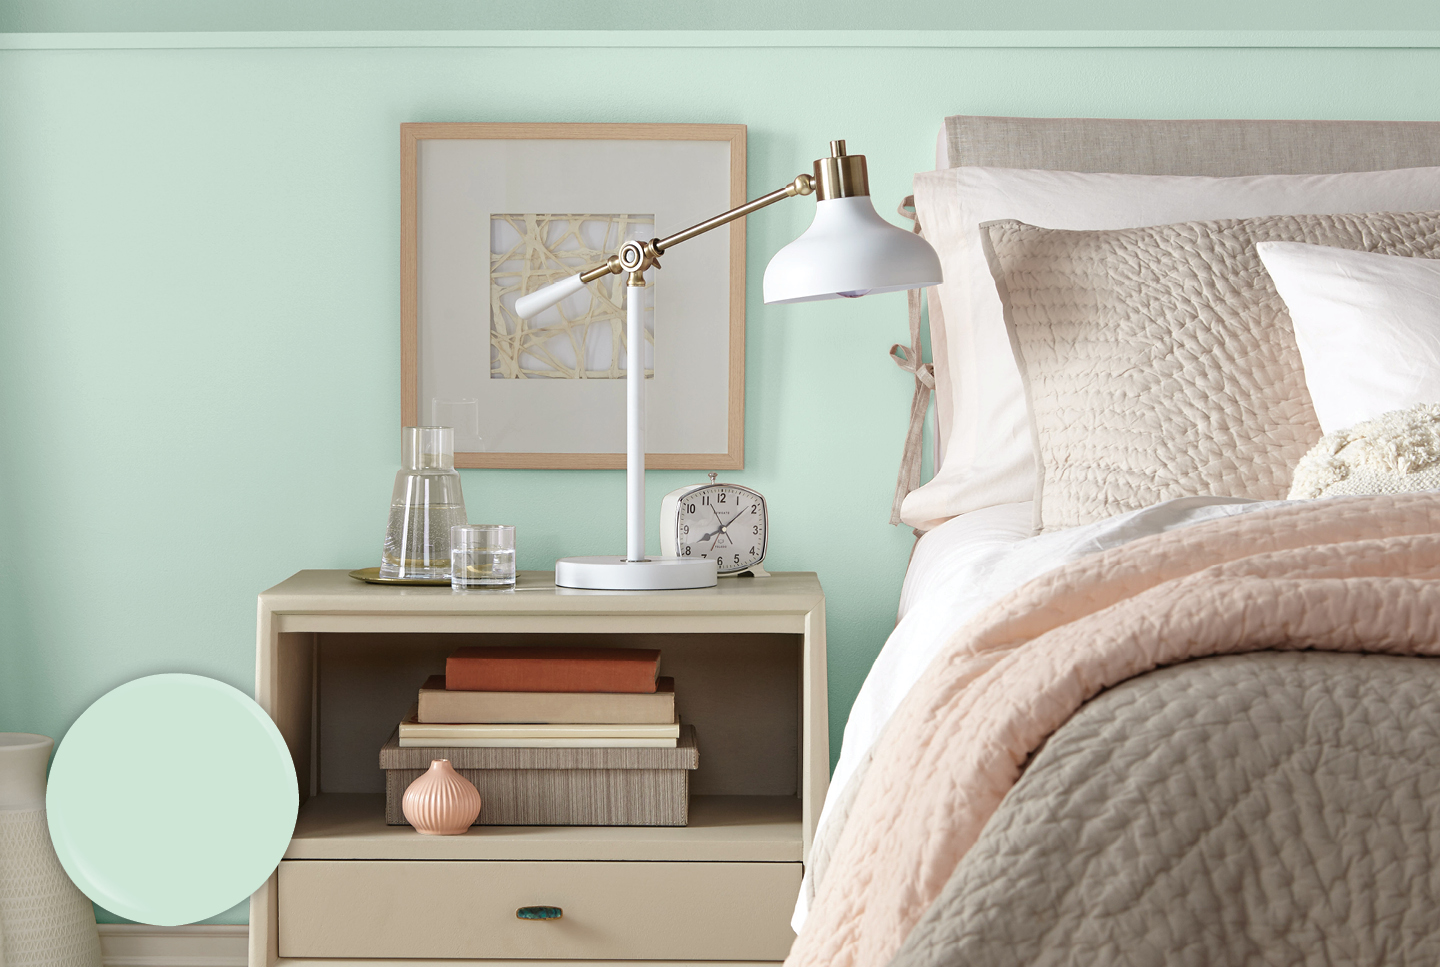 Bedside table with lamp and alarm clock against an Icy Mint wall. Bed carries neutral décor.  